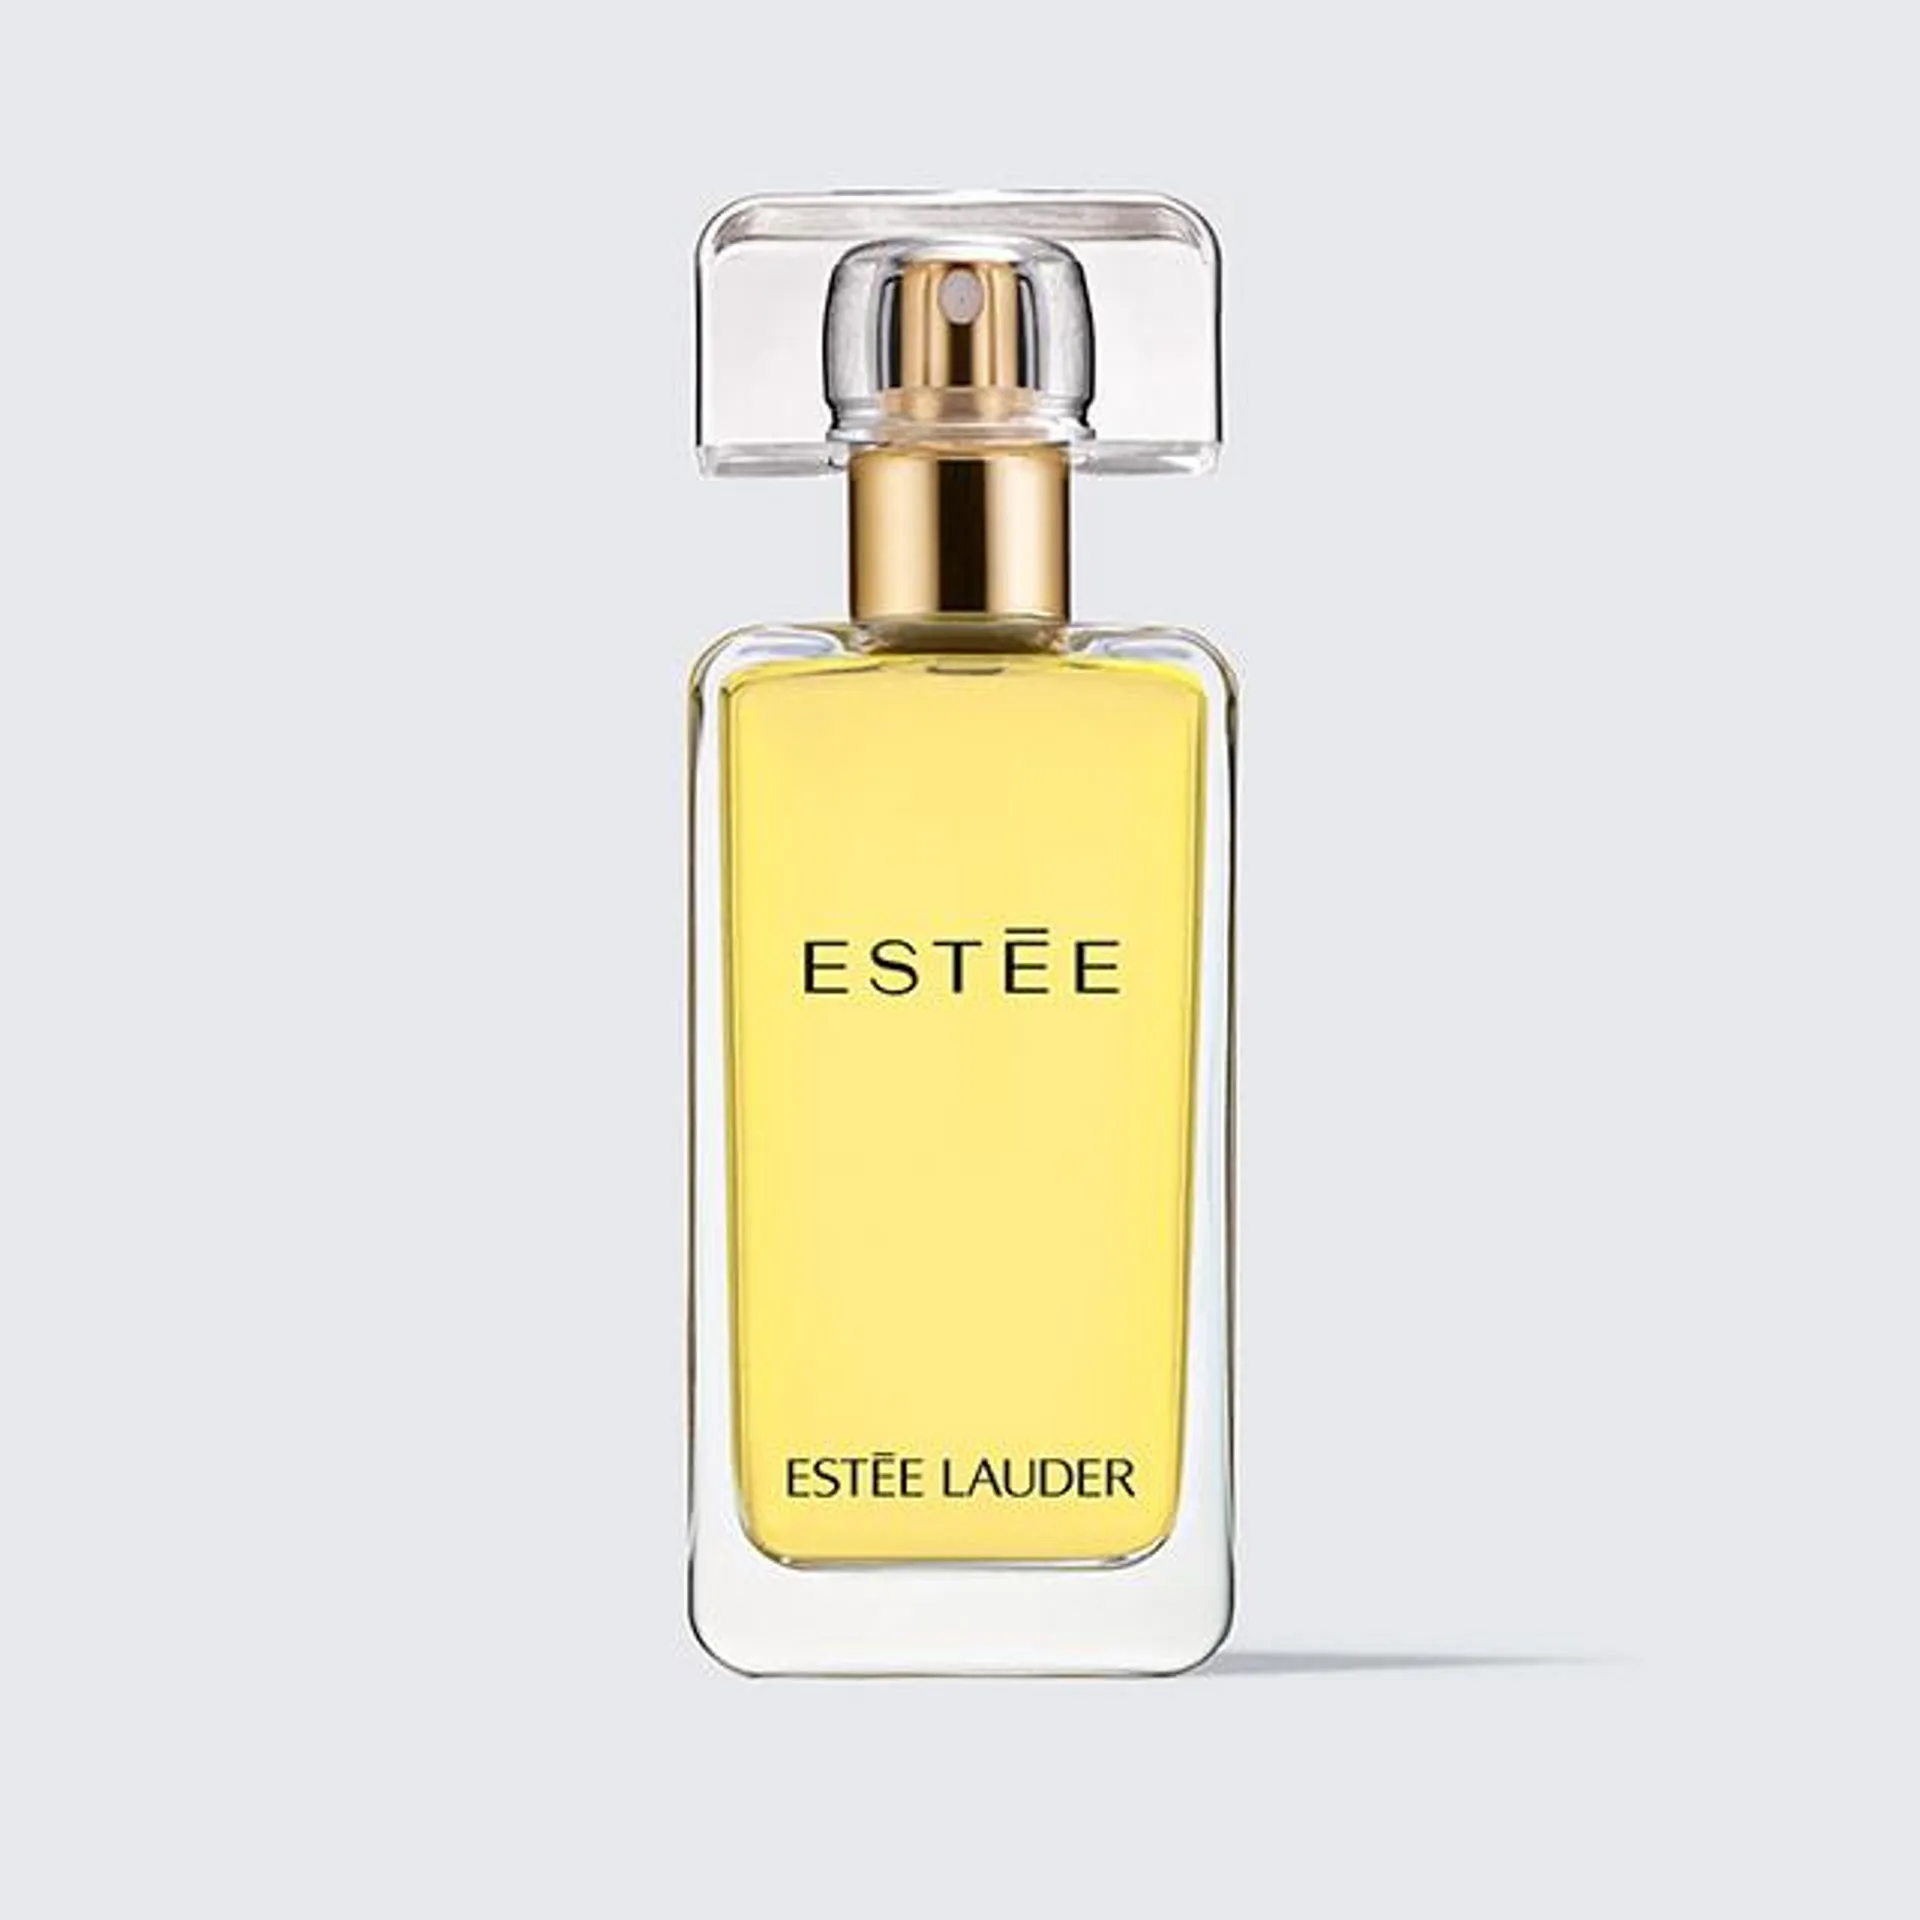 The House of Estee Lauder